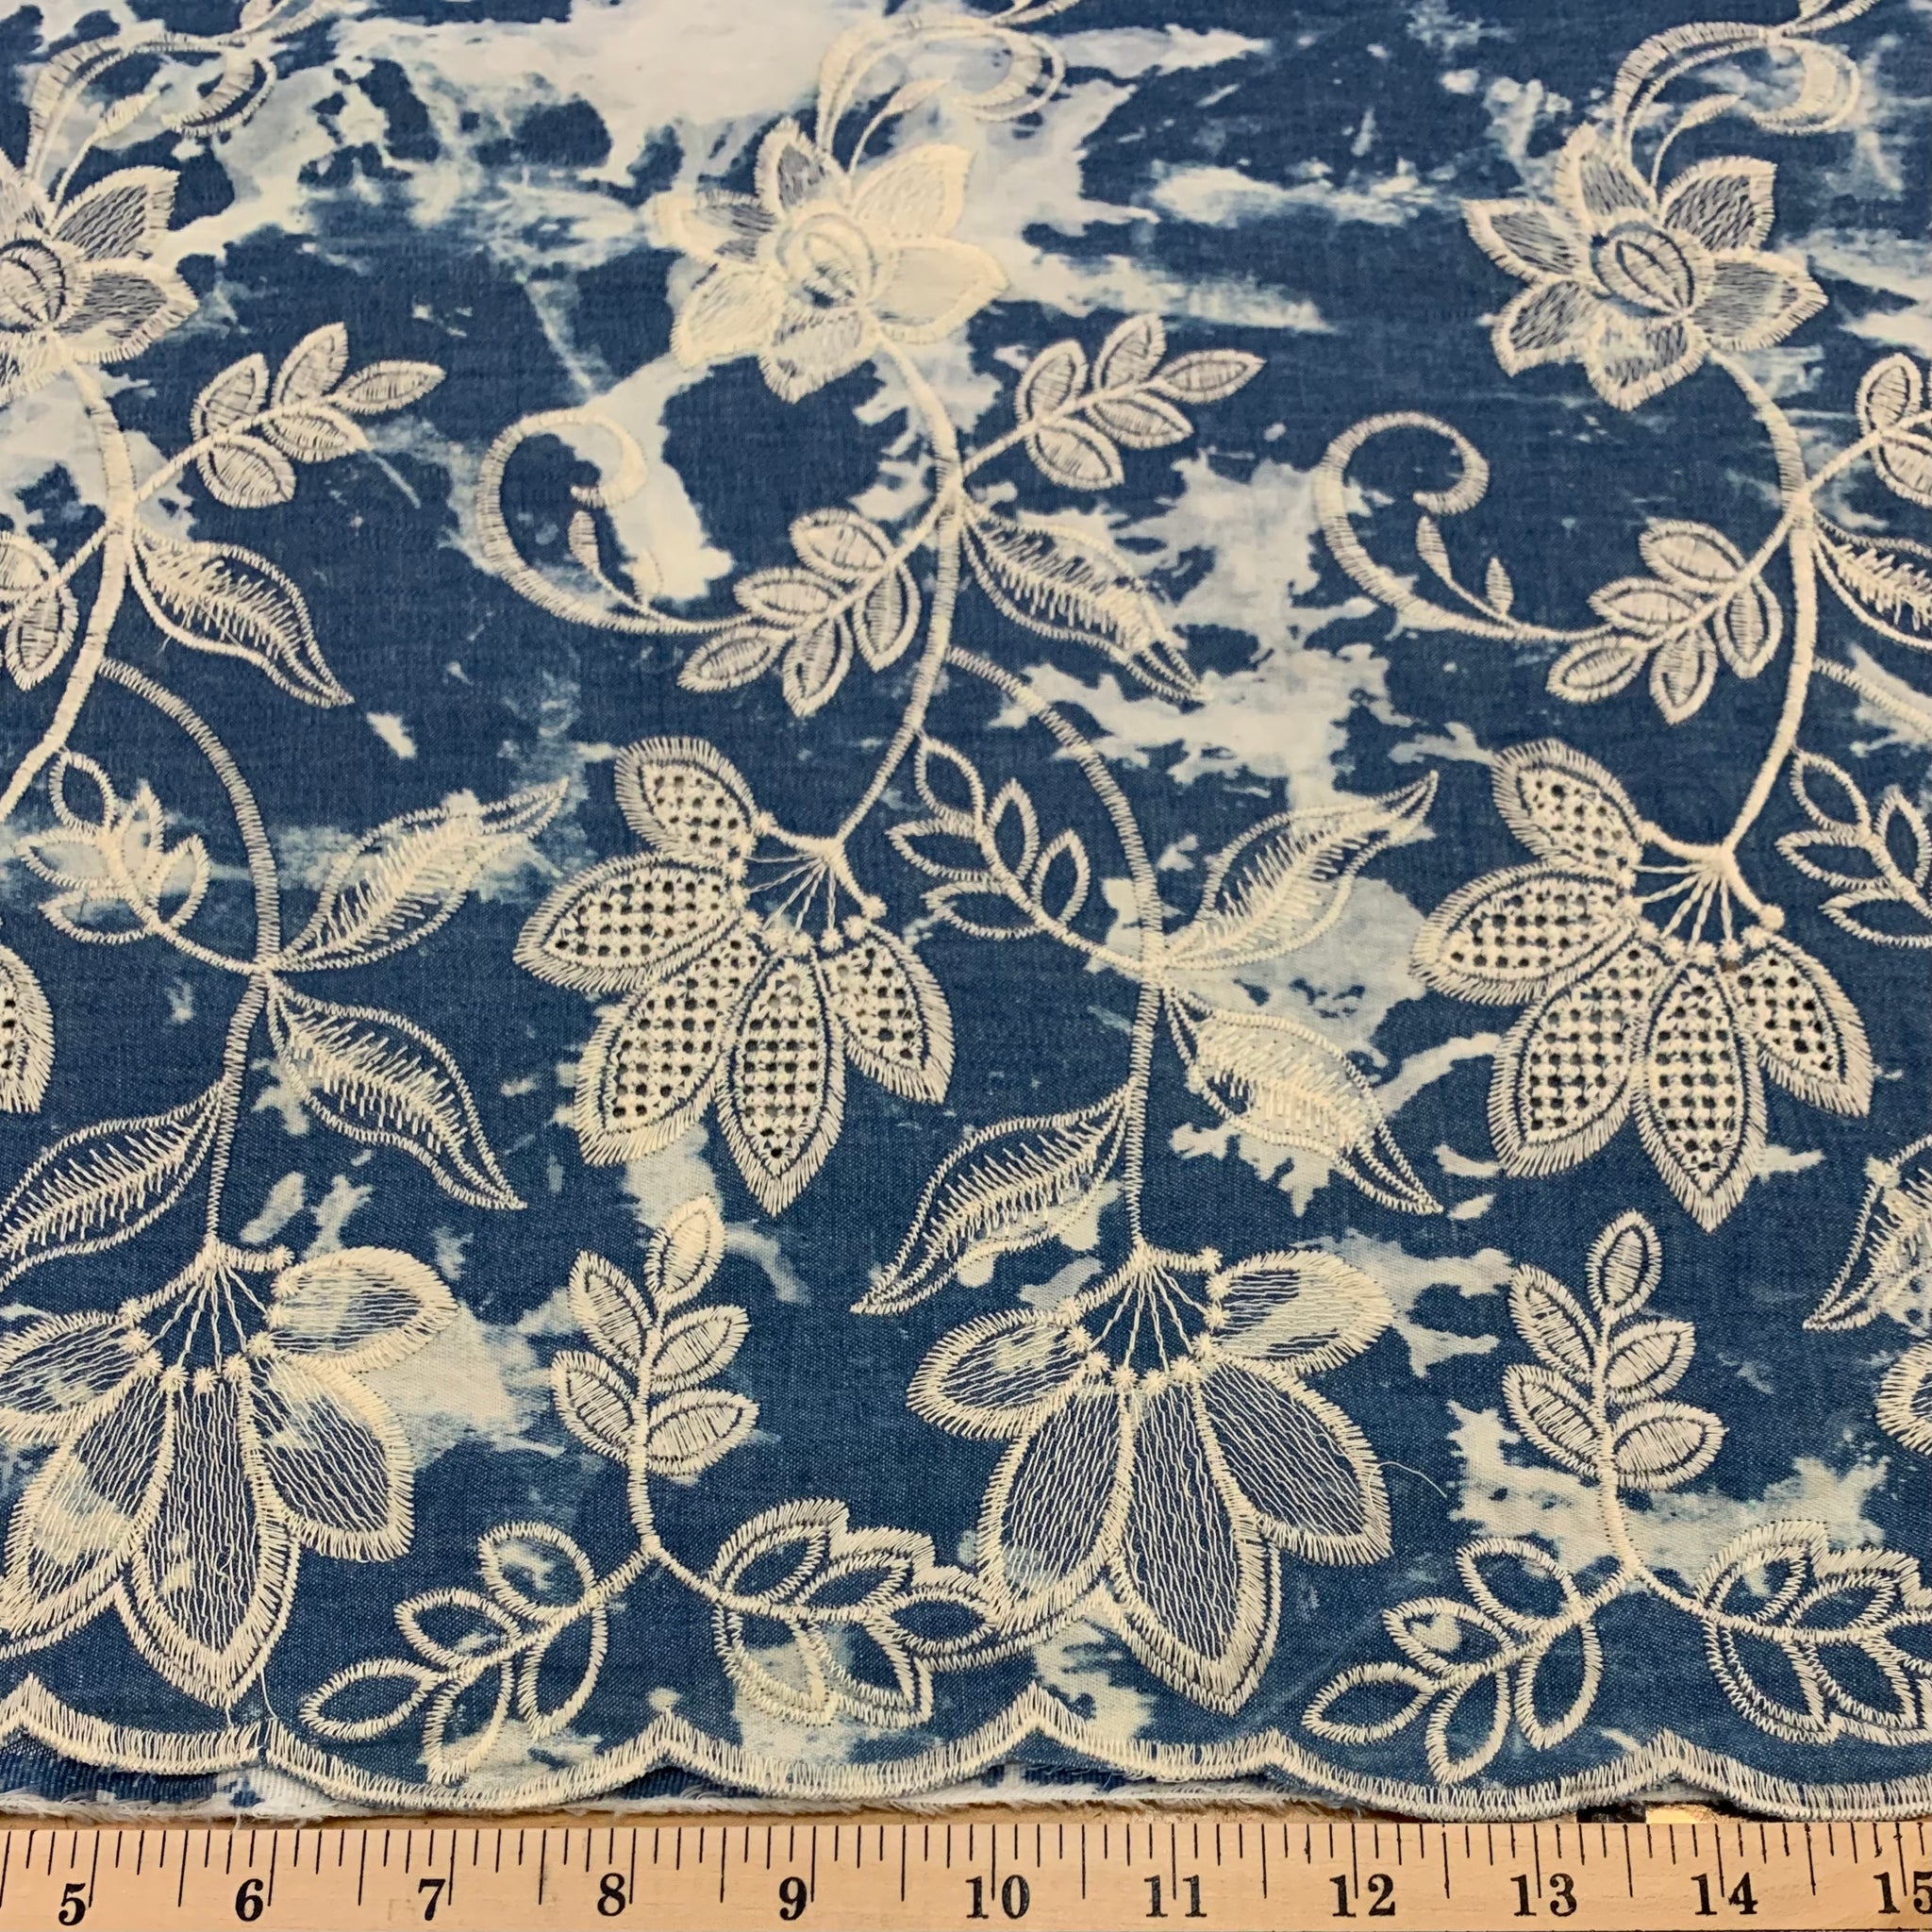 Embroidered Border Bleach Spot Cotton Chambray Fabric